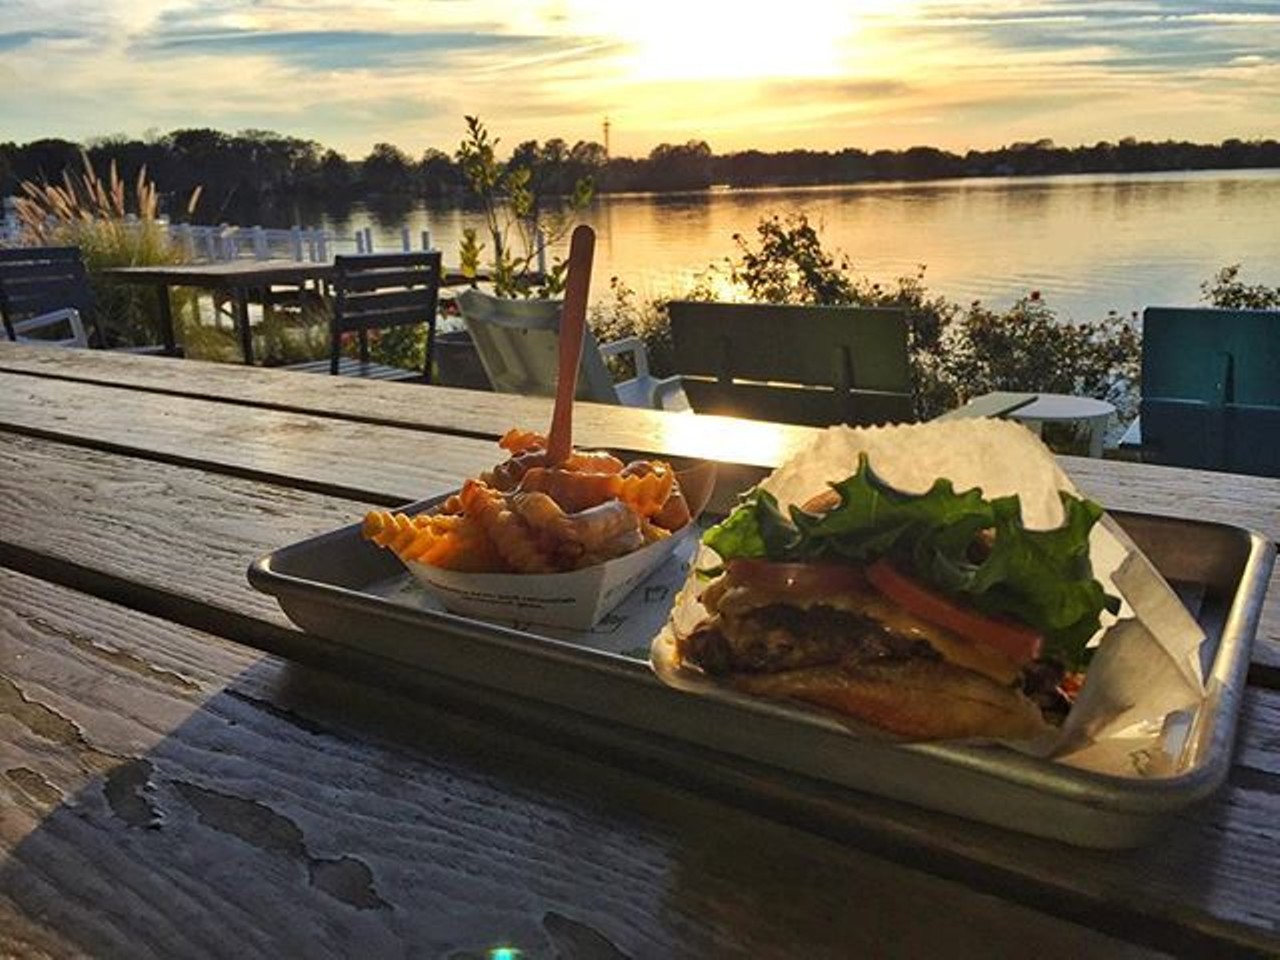 
Watch the sun set over Lake Killarney while hanging out in the surprisingly nice back patio of Shake Shack. If your valentine likes the sweet-and-salty thing, order a custard concrete and dip your crinkle fries. Instant upgrade! Plus, they have beer and wine. 
Photo via luis.jose.ramos/Instagram